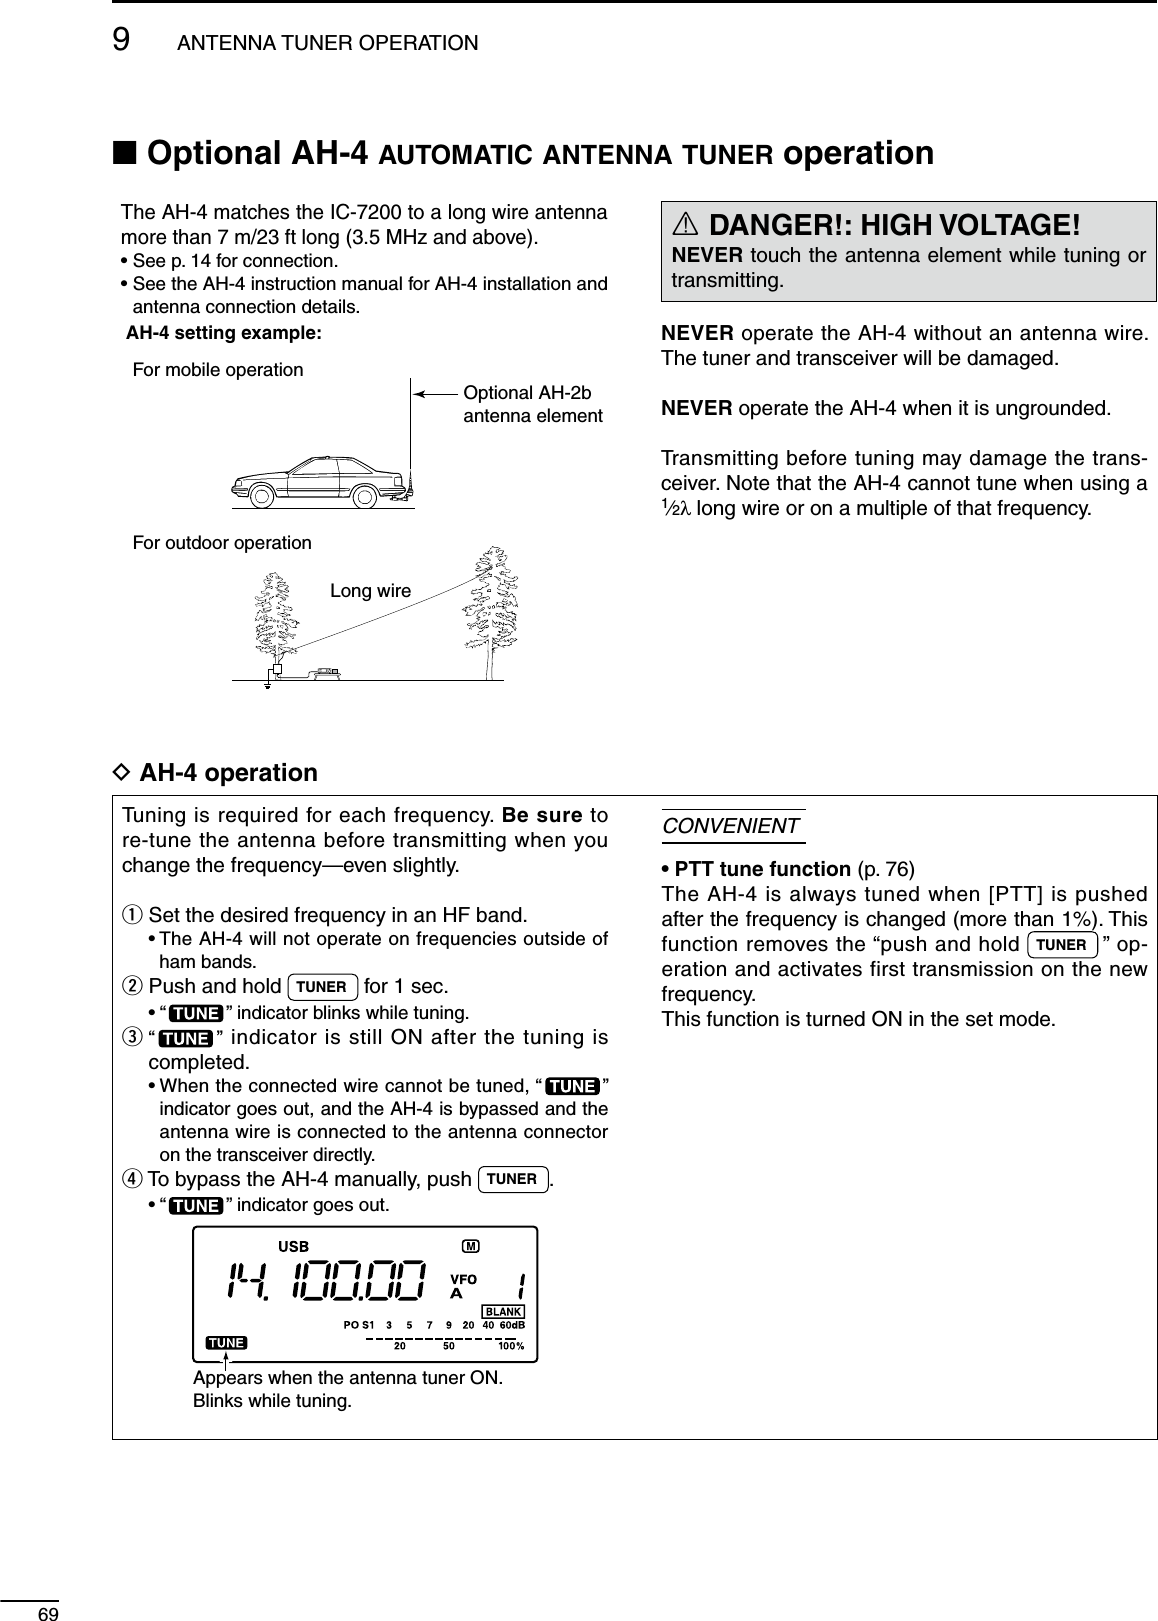 699ANTENNA TUNER OPERATIONN Optional AH-4 AUTOMATIC ANTENNA TUNER operationThe AH-4 matches the IC-7200 to a long wire antenna more than 7 m/23 ft long (3.5 MHz and above).• See p. 14 for connection.•  See the AH-4 instruction manual for AH-4 installation and antenna connection details.AH-4 setting example:For mobile operation    For outdoor operation    Long wireOptional AH-2bantenna elementR DANGER!: HIGH VOLTAGE!NEVER touch the antenna element while tuning or transmitting.NEVER operate the AH-4 without an antenna wire. The tuner and transceiver will be damaged.NEVER operate the AH-4 when it is ungrounded.Transmitting before tuning may damage the trans-ceiver. Note that the AH-4 cannot tune when using a 1⁄2λ long wire or on a multiple of that frequency.D AH-4 operationTuning is required for each frequency. Be sure to re-tune the antenna before transmitting when you change the frequency—even slightly.q Set the desired frequency in an HF band. •  The AH-4 will not operate on frequencies outside of ham bands.w Push and hold  TUNER  for 1 sec. • “ ” indicator blinks while tuning.e  “ ” indicator is still ON after the tuning is completed. •  When the connected wire cannot be tuned, “ ” indicator goes out, and the AH-4 is bypassed and the antenna wire is connected to the antenna connector on the transceiver directly.r To bypass the AH-4 manually, push  TUNER . • “ ” indicator goes out.Appears when the antenna tuner ON.Blinks while tuning.CONVENIENT• PTT tune function (p. 76)The AH-4 is always tuned when [PTT] is pushed after the frequency is changed (more than 1%). This function removes the “push and hold  TUNER  ” op-eration and activates first transmission on the new frequency.This function is turned ON in the set mode.